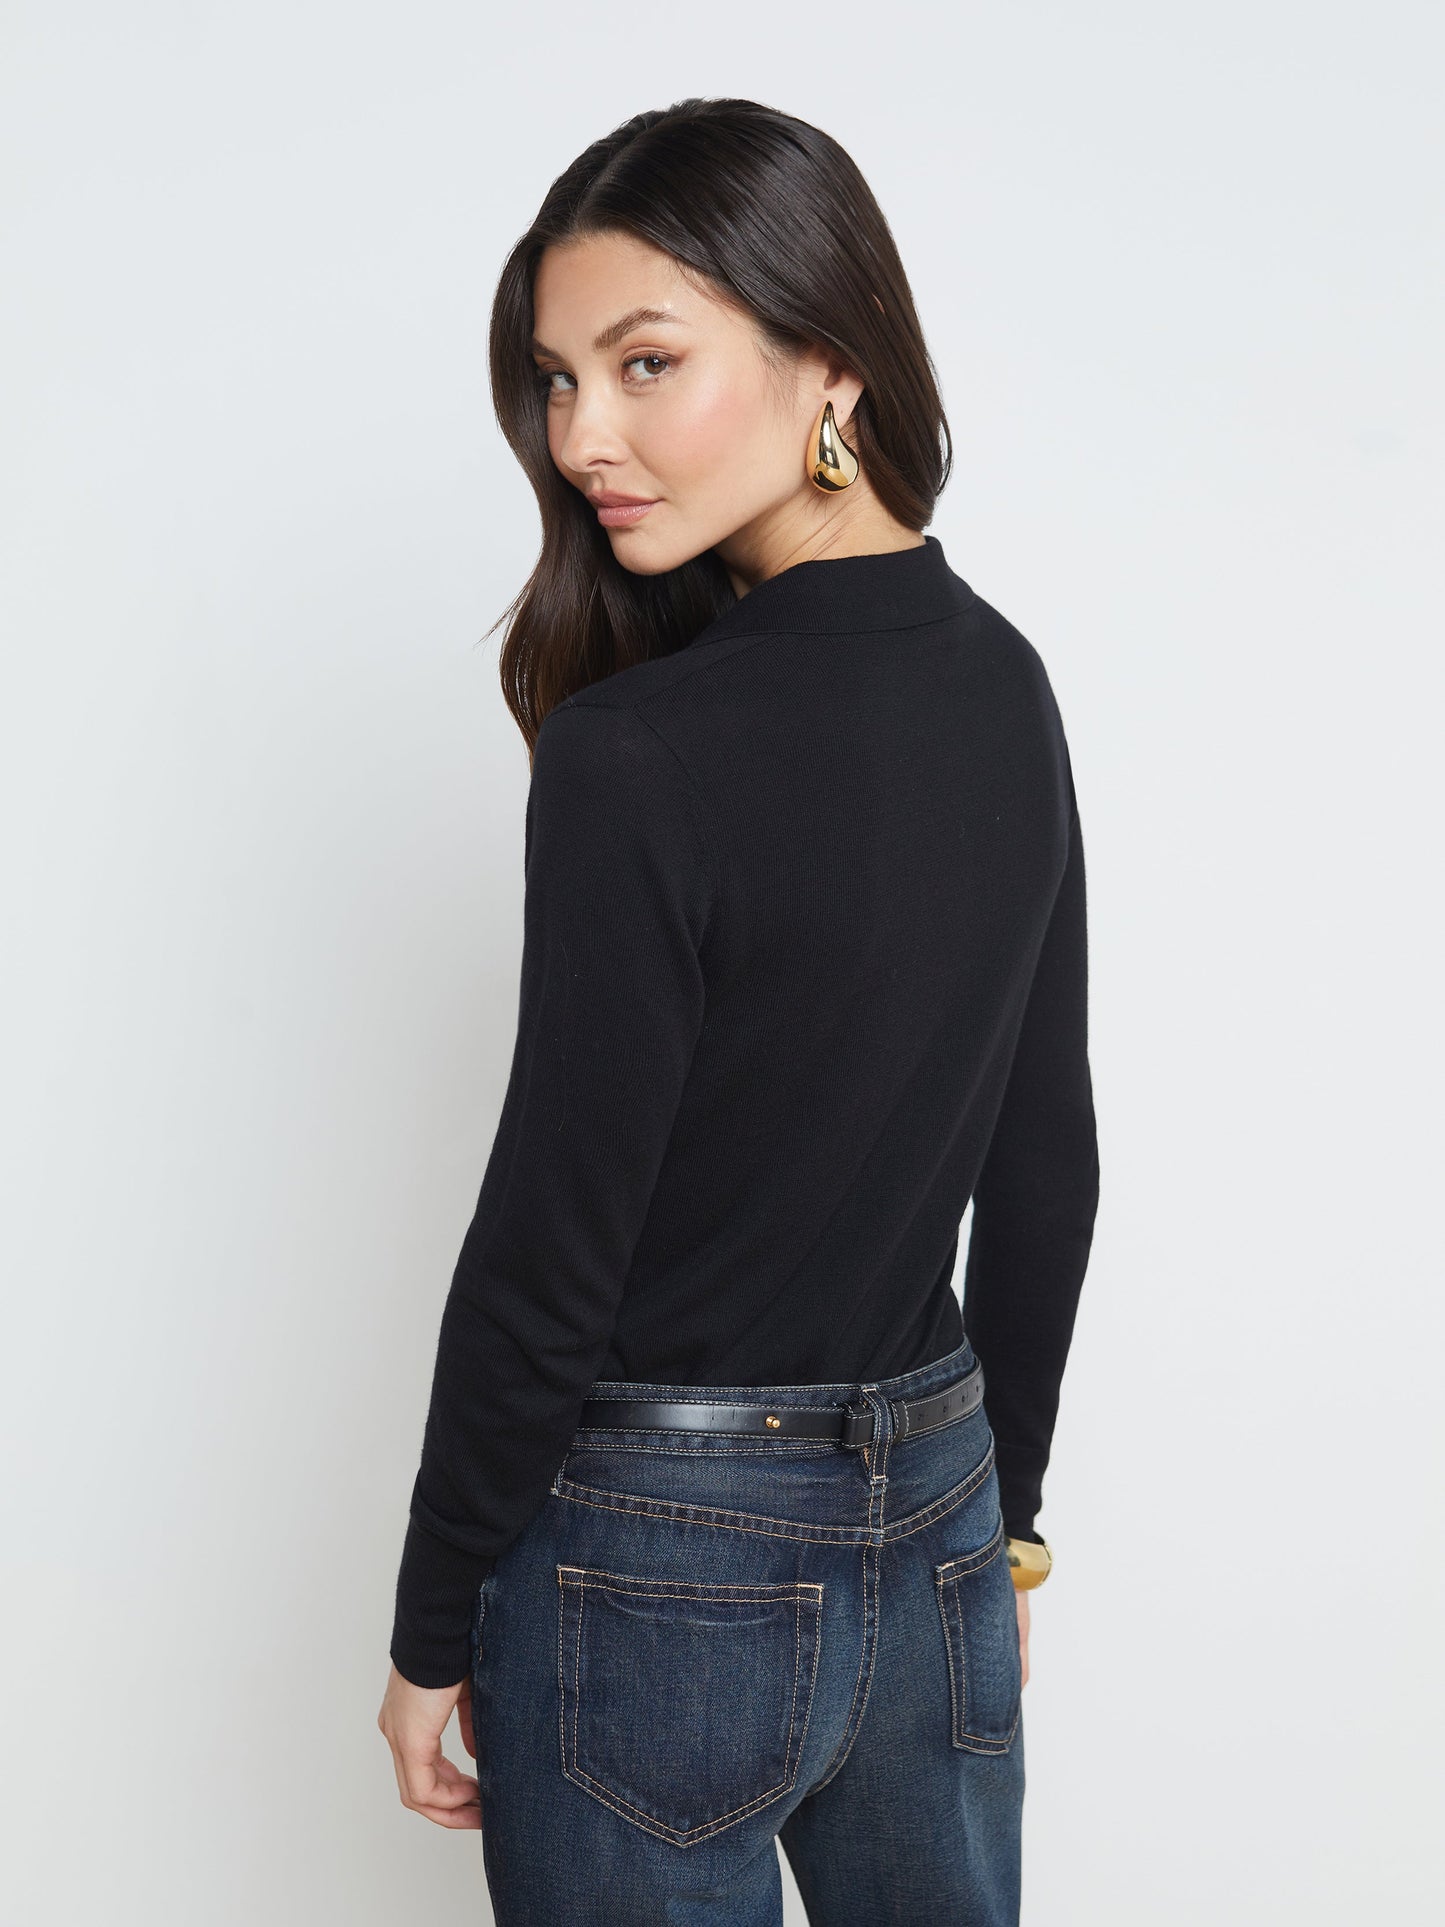 Lagence Sterling Collared Sweater